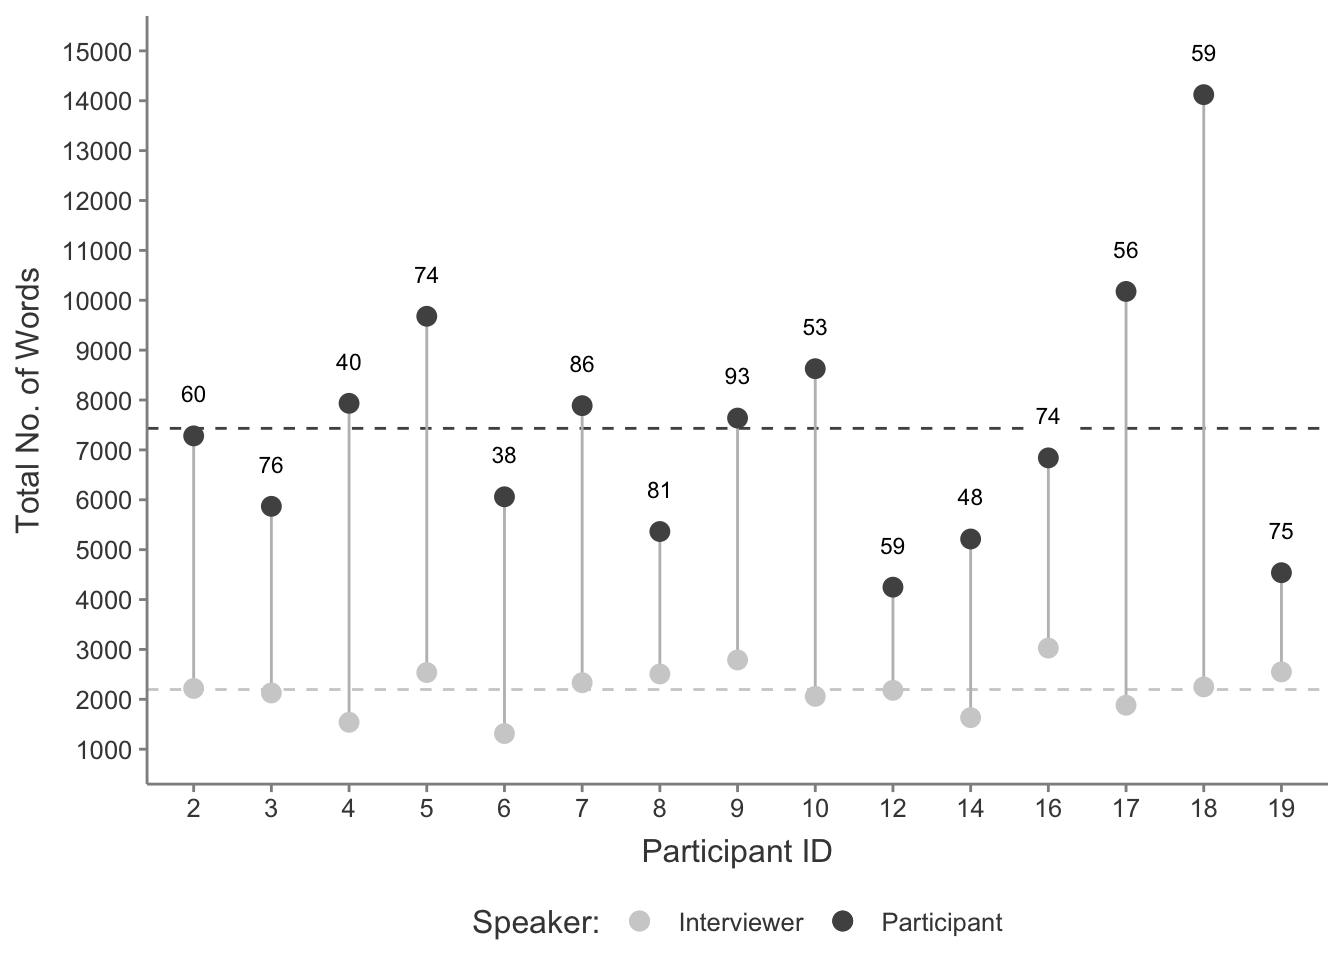 Total word count per participant interview for both participant and interviewer. Number labels indicate number of question and response exchanges per interview. Dashed lines indicate the average interview word count for both participants and interviewer.